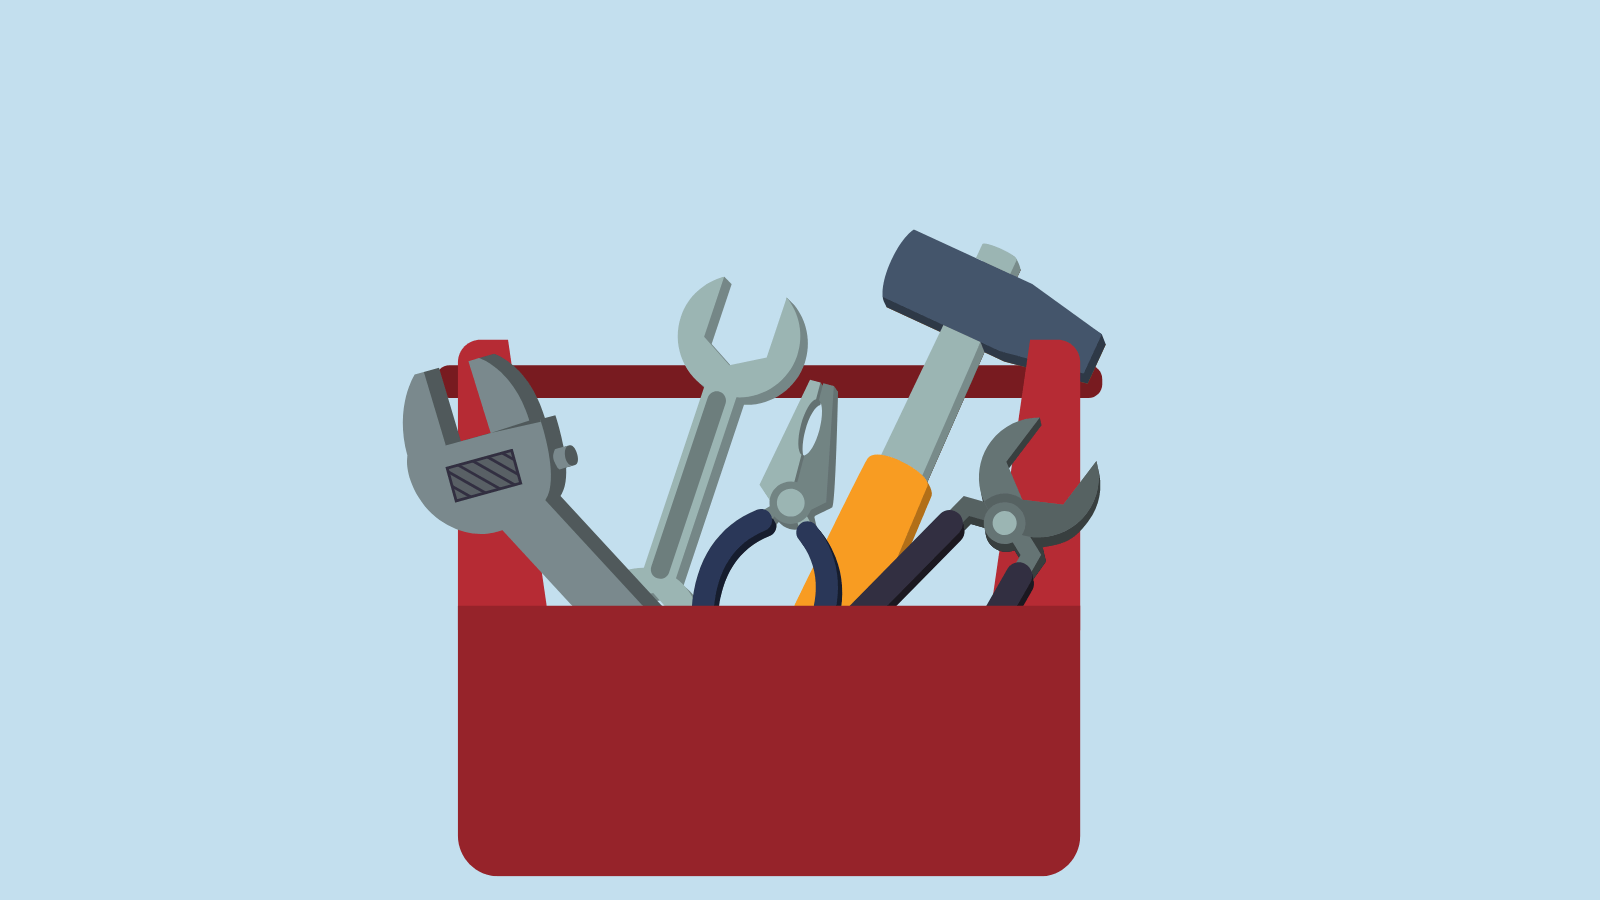 A red toolbox filled with tools